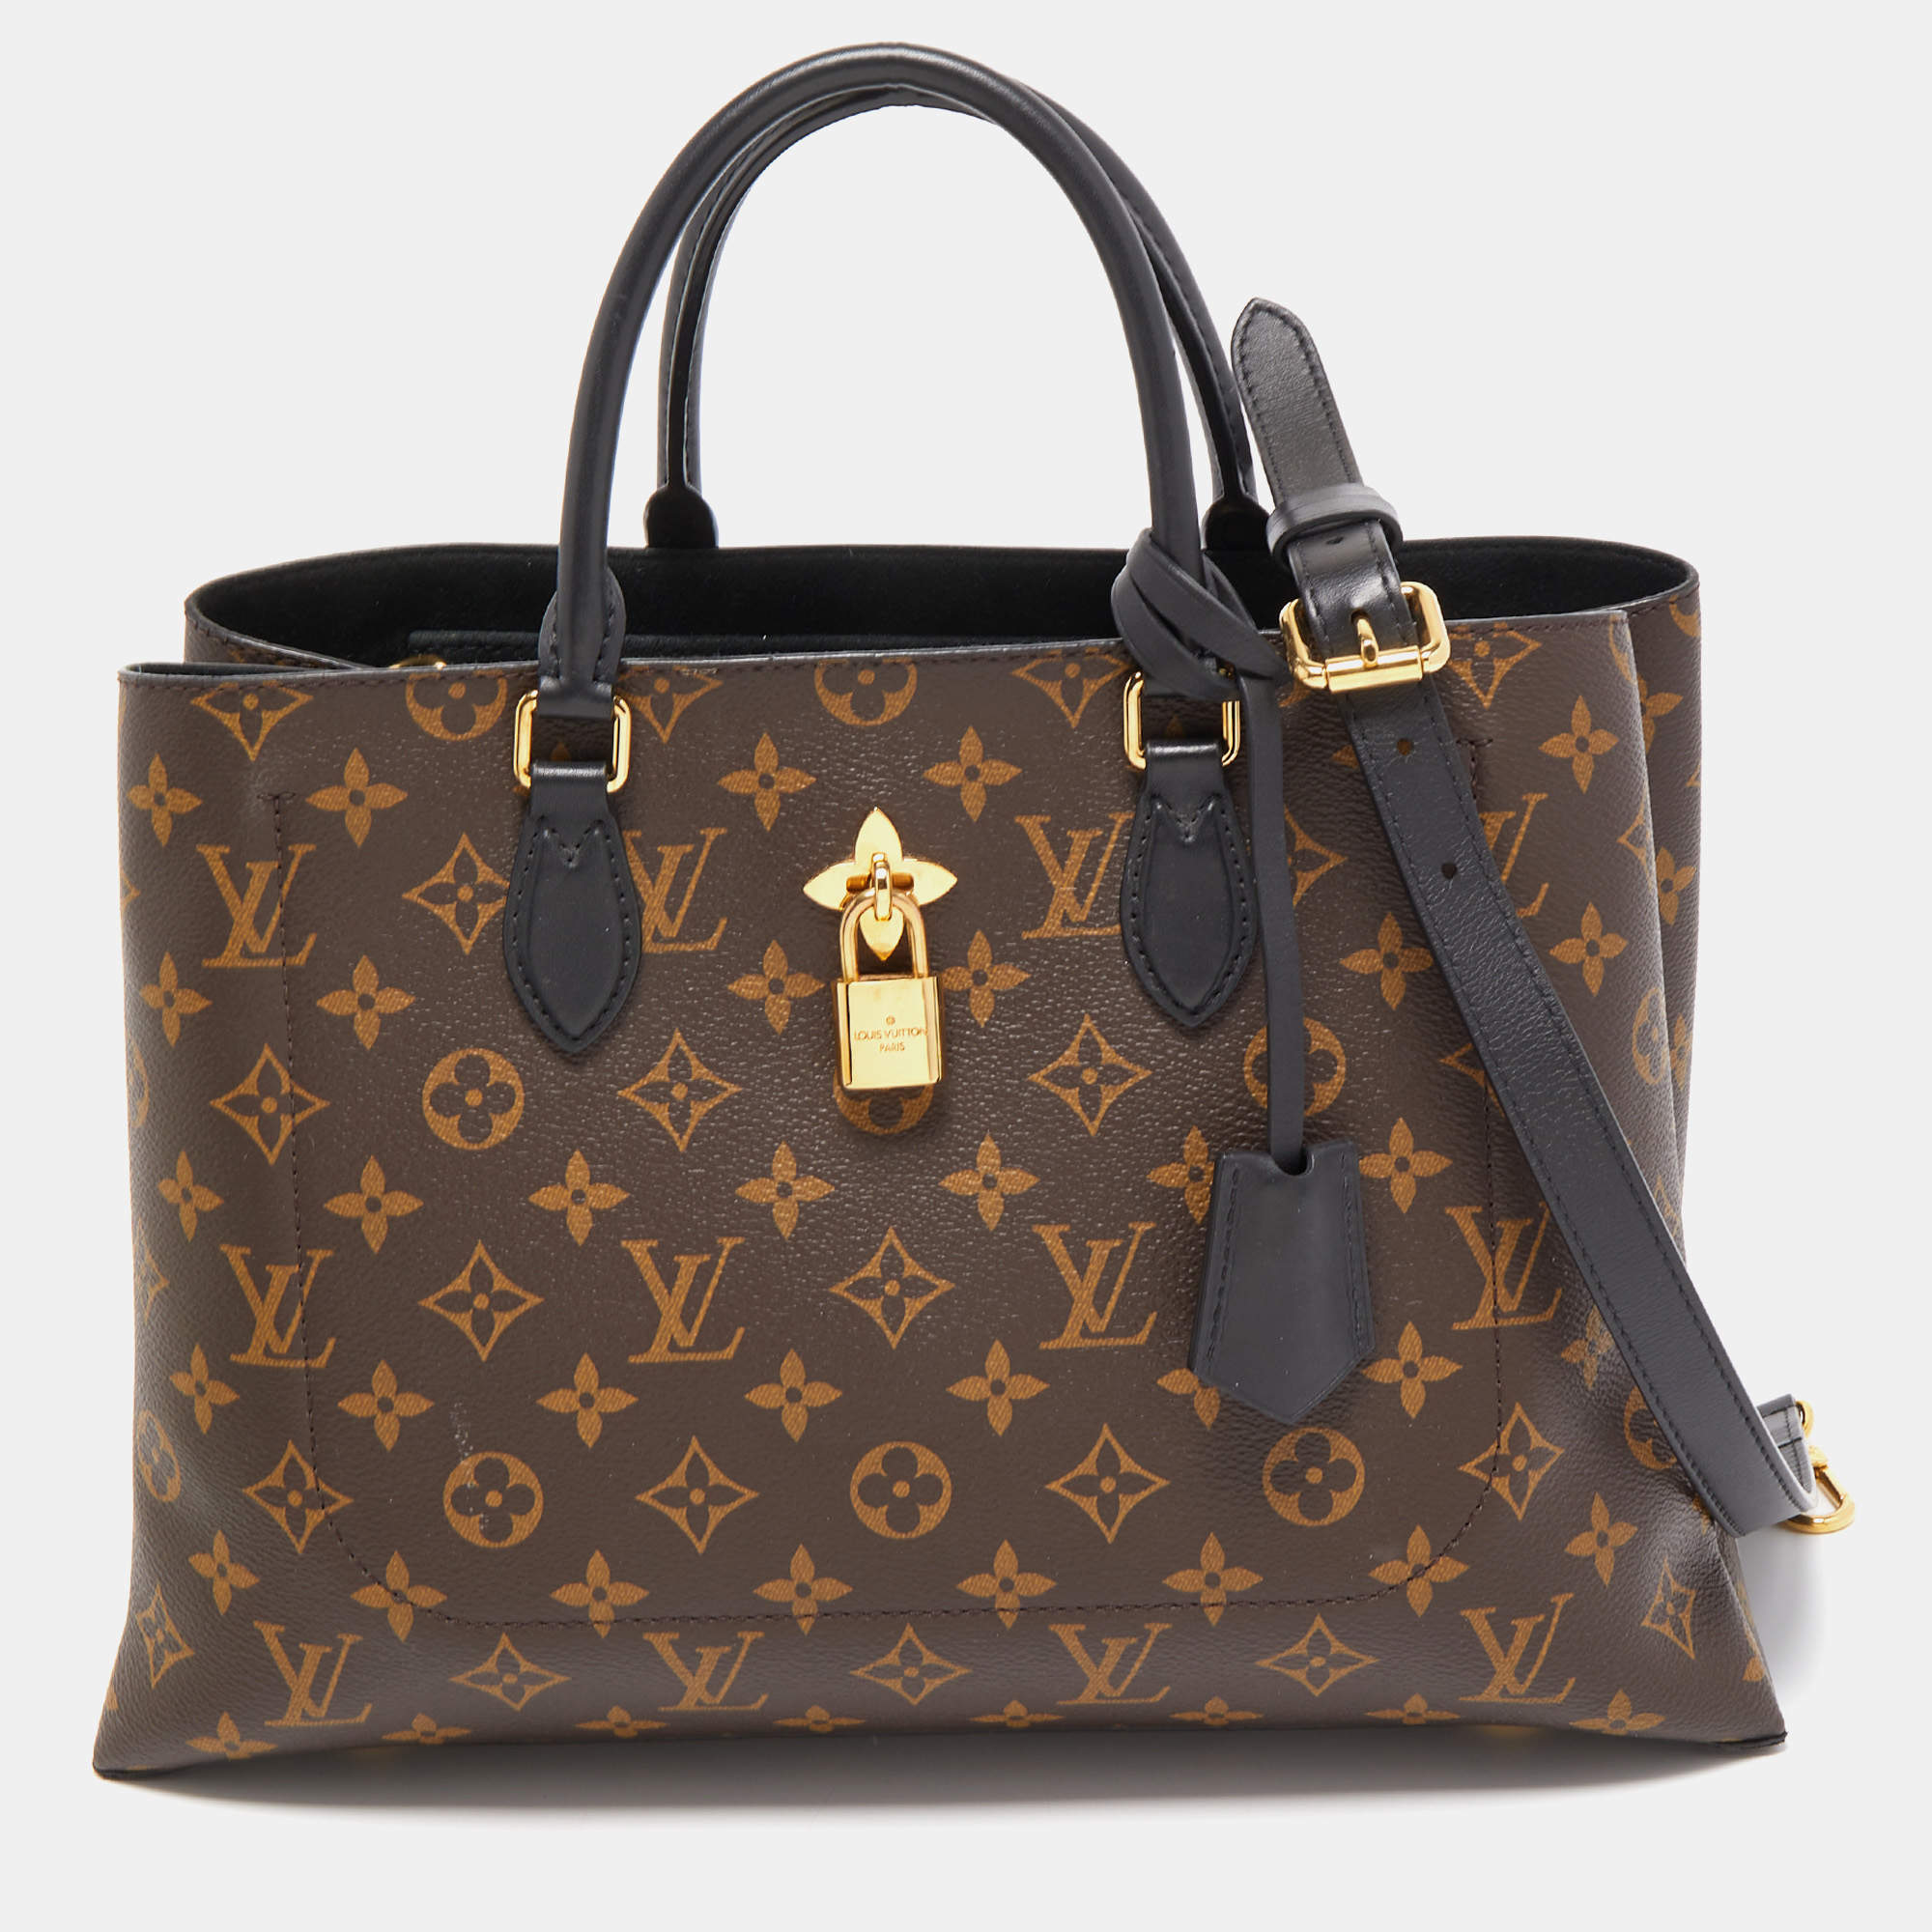 100+ affordable louis vuitton canvas tote bag For Sale, Tote Bags